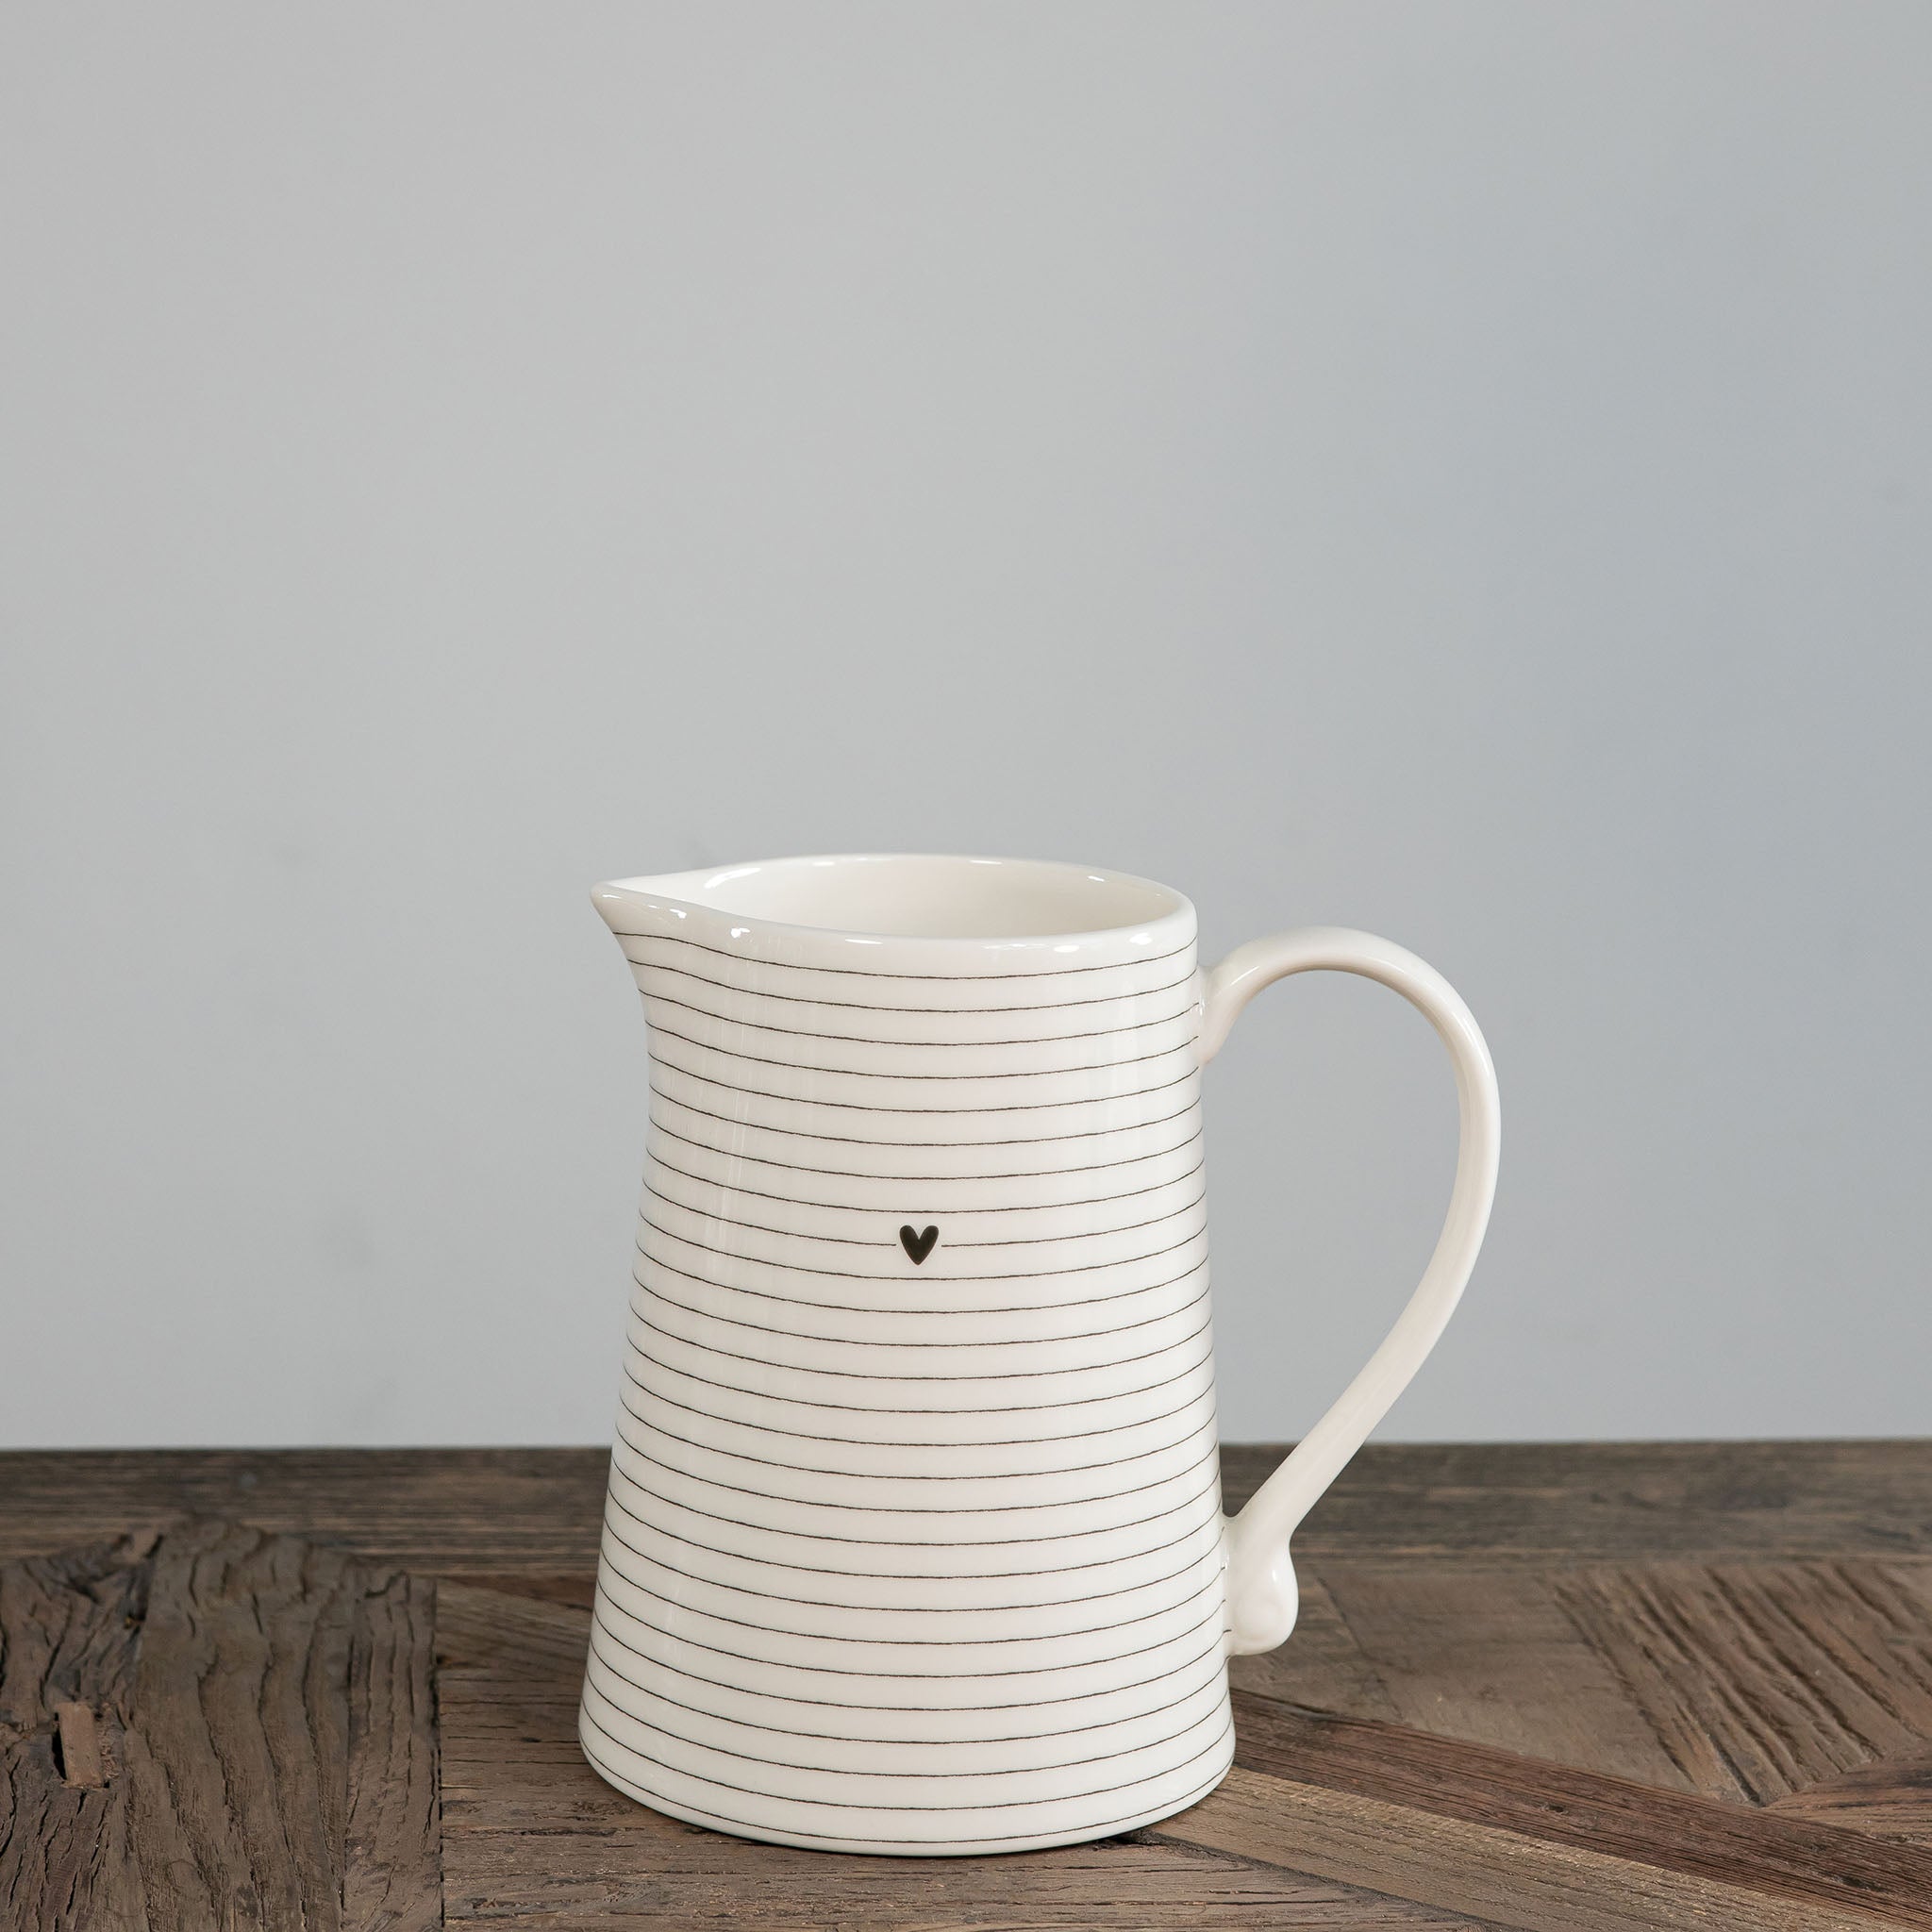 Medium carafe with stripes and heart